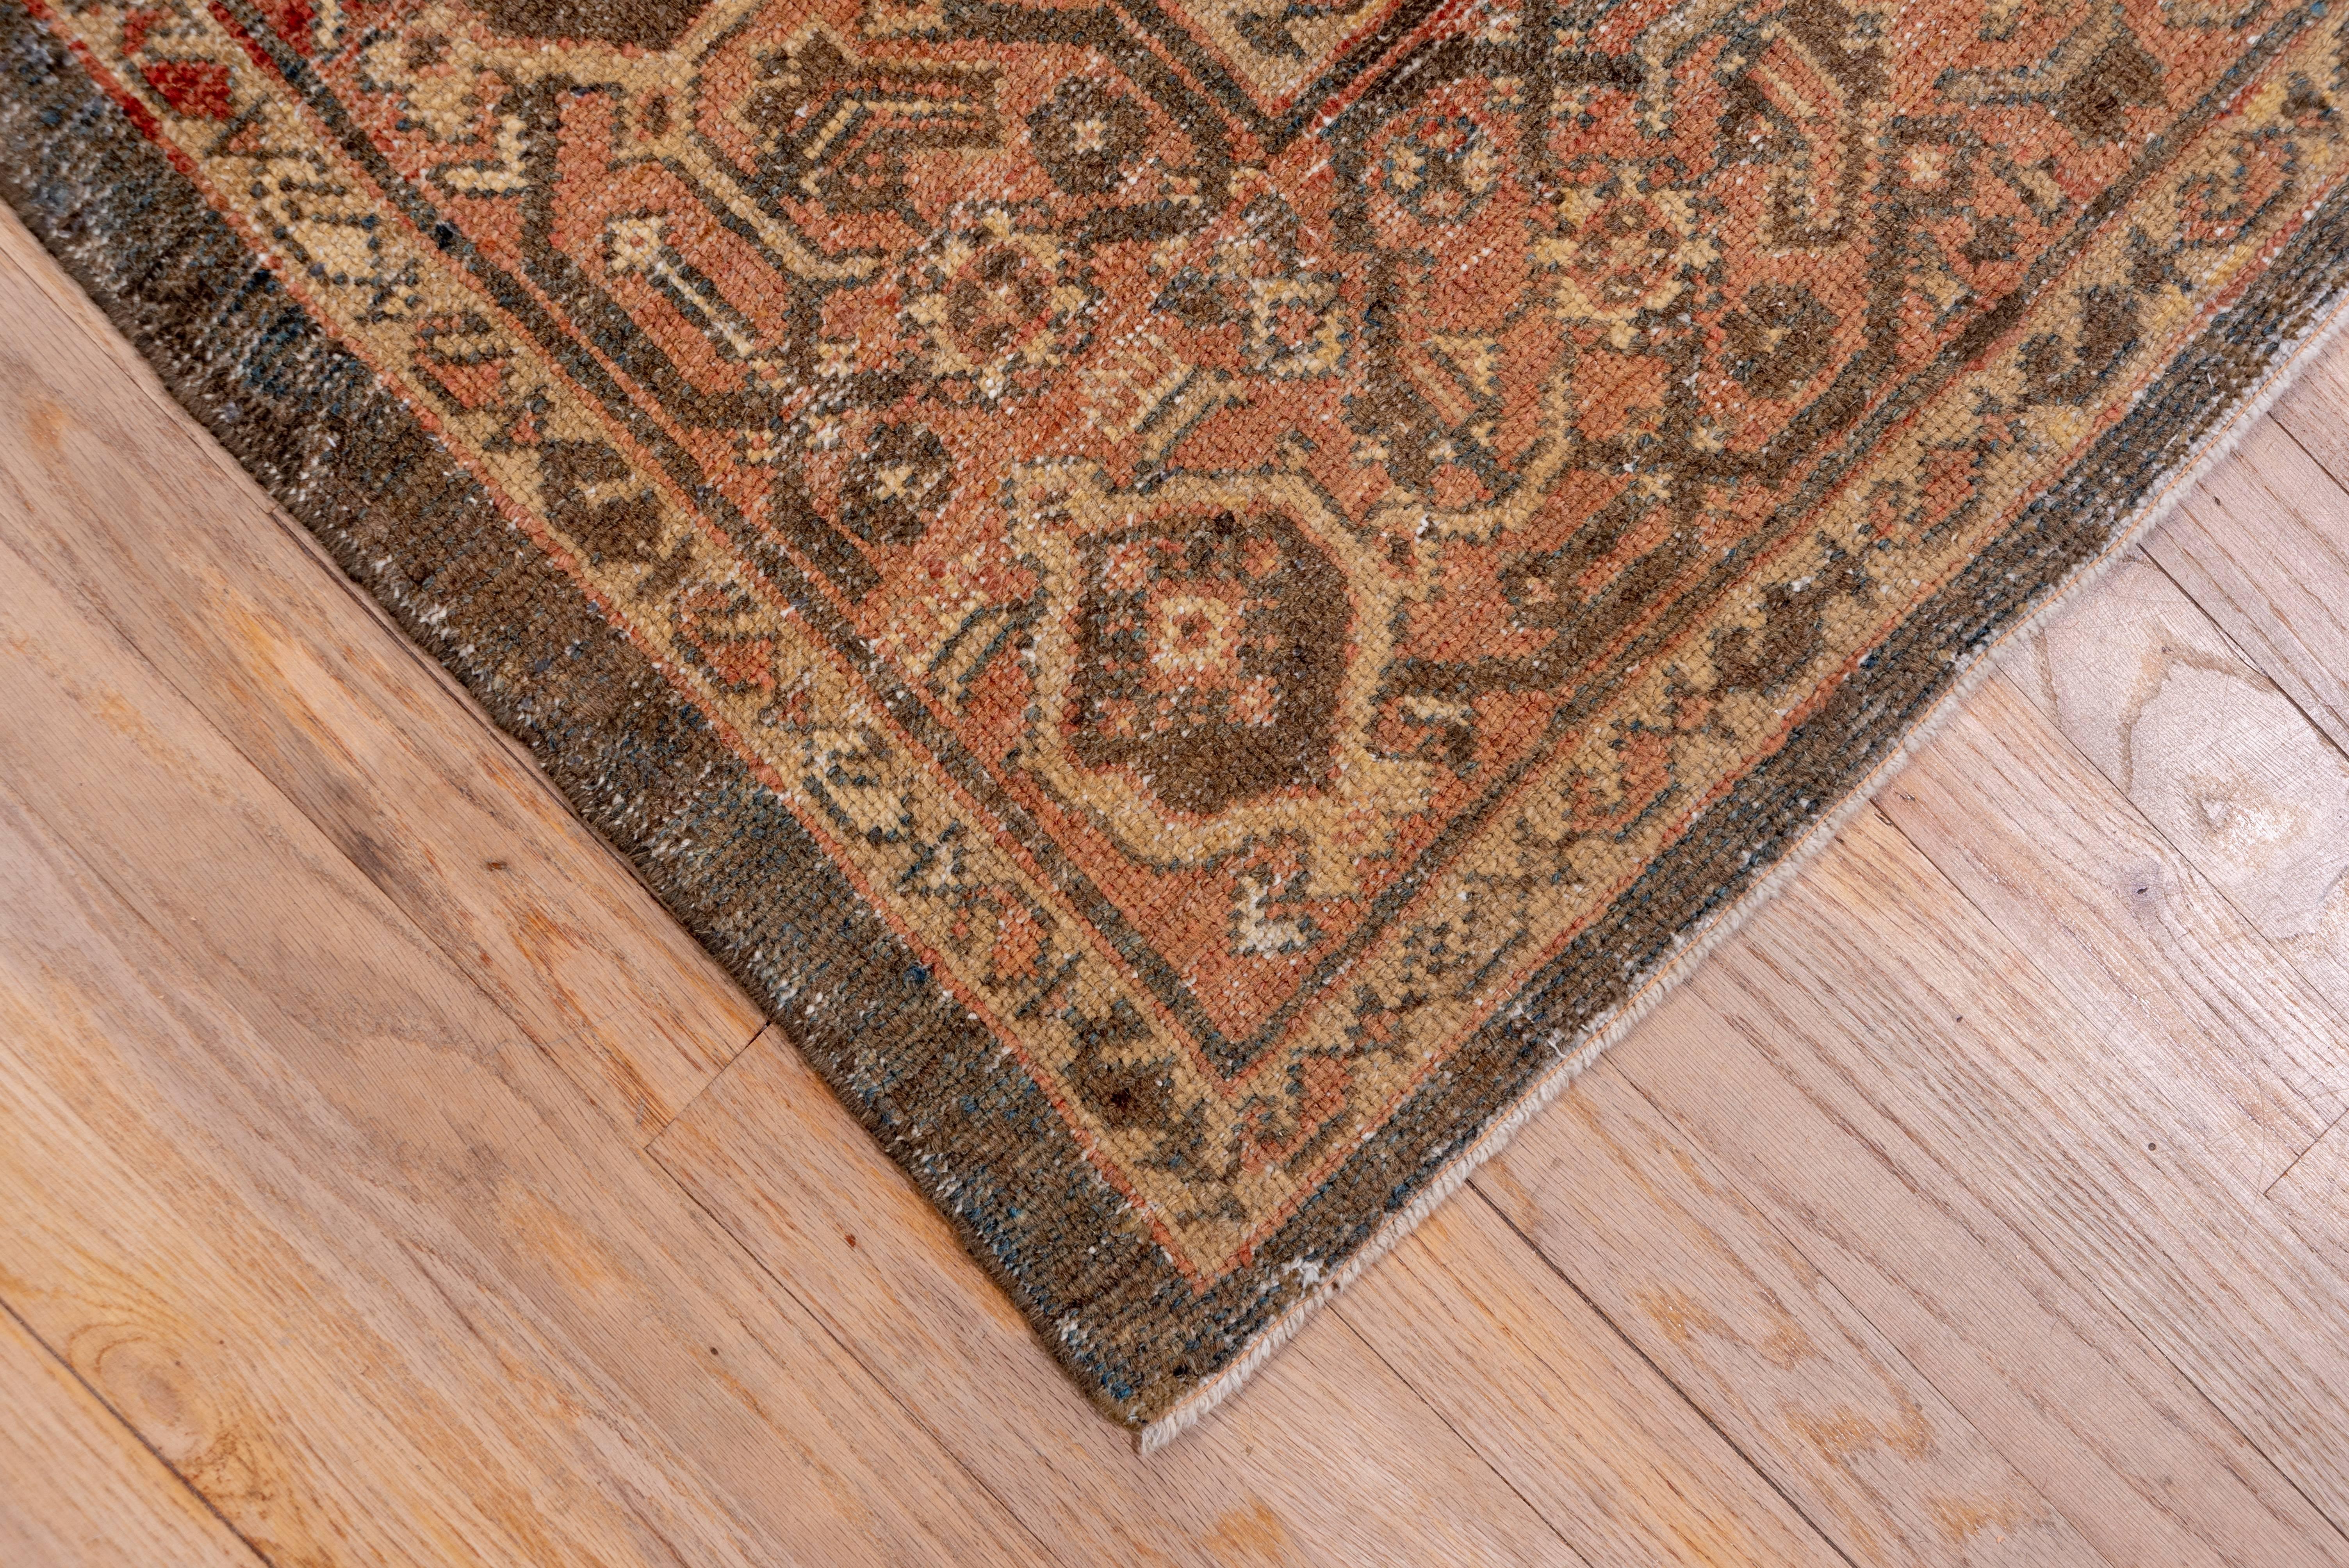 This west Persian rustic carpet has a stepped brick sub field adorned with rosettes anchoring spiraling vines and triple flowers, all on an old ivory ground with Herati corners. The caramel border features geometric turtle palmettes facing in and